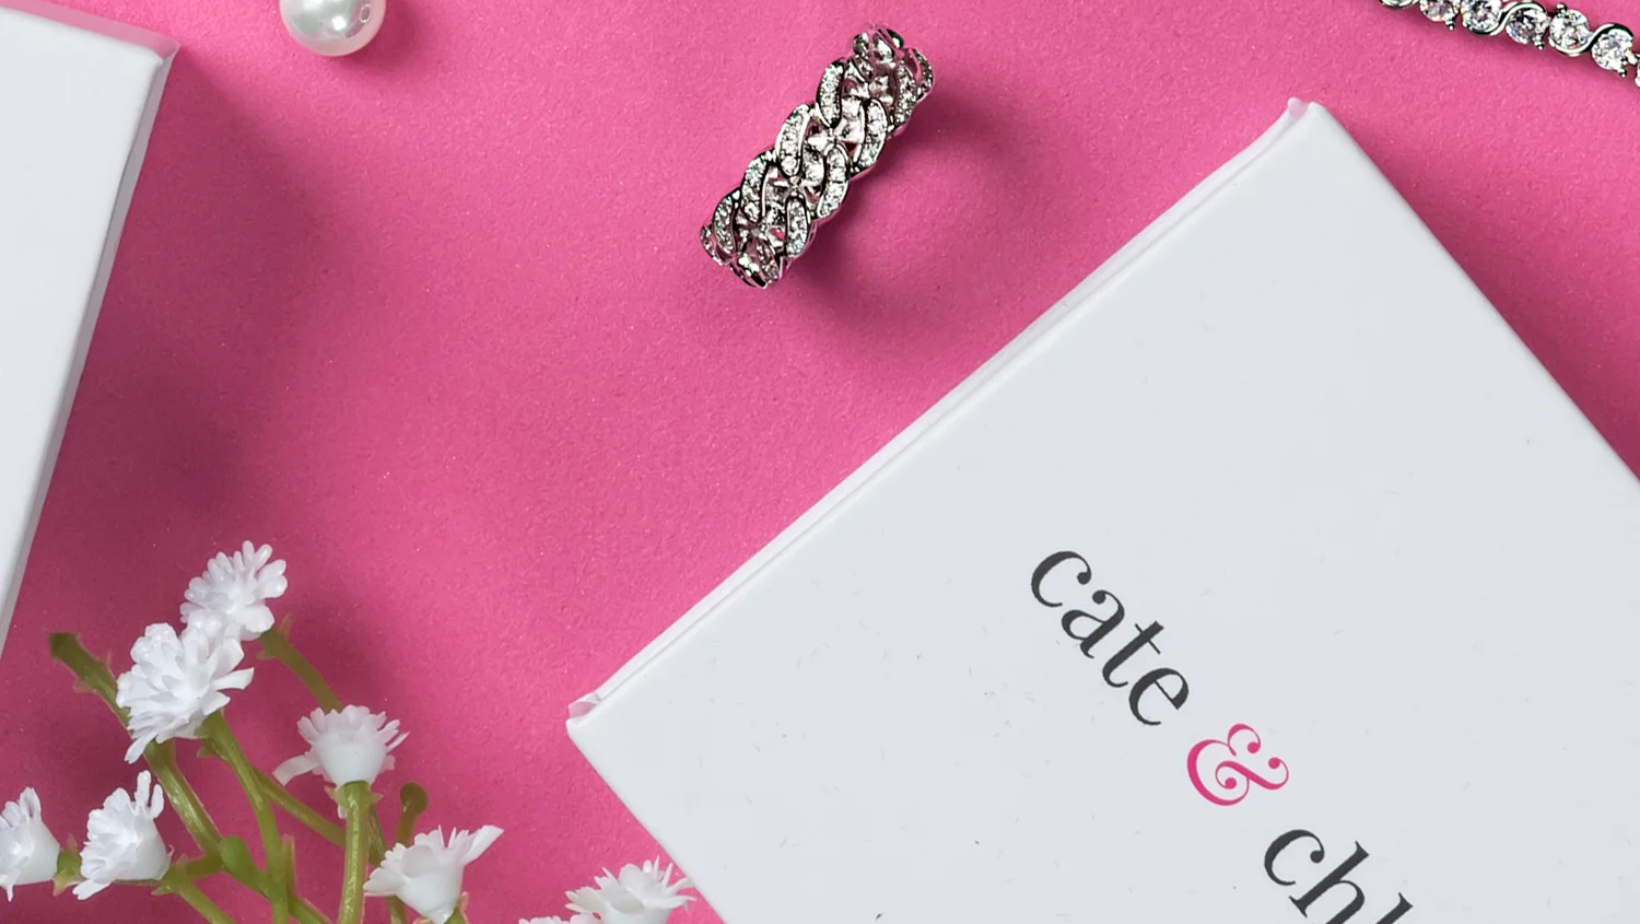 Cate & Chloe's Wedding Rings: Timeless Elegance for Your Big Day